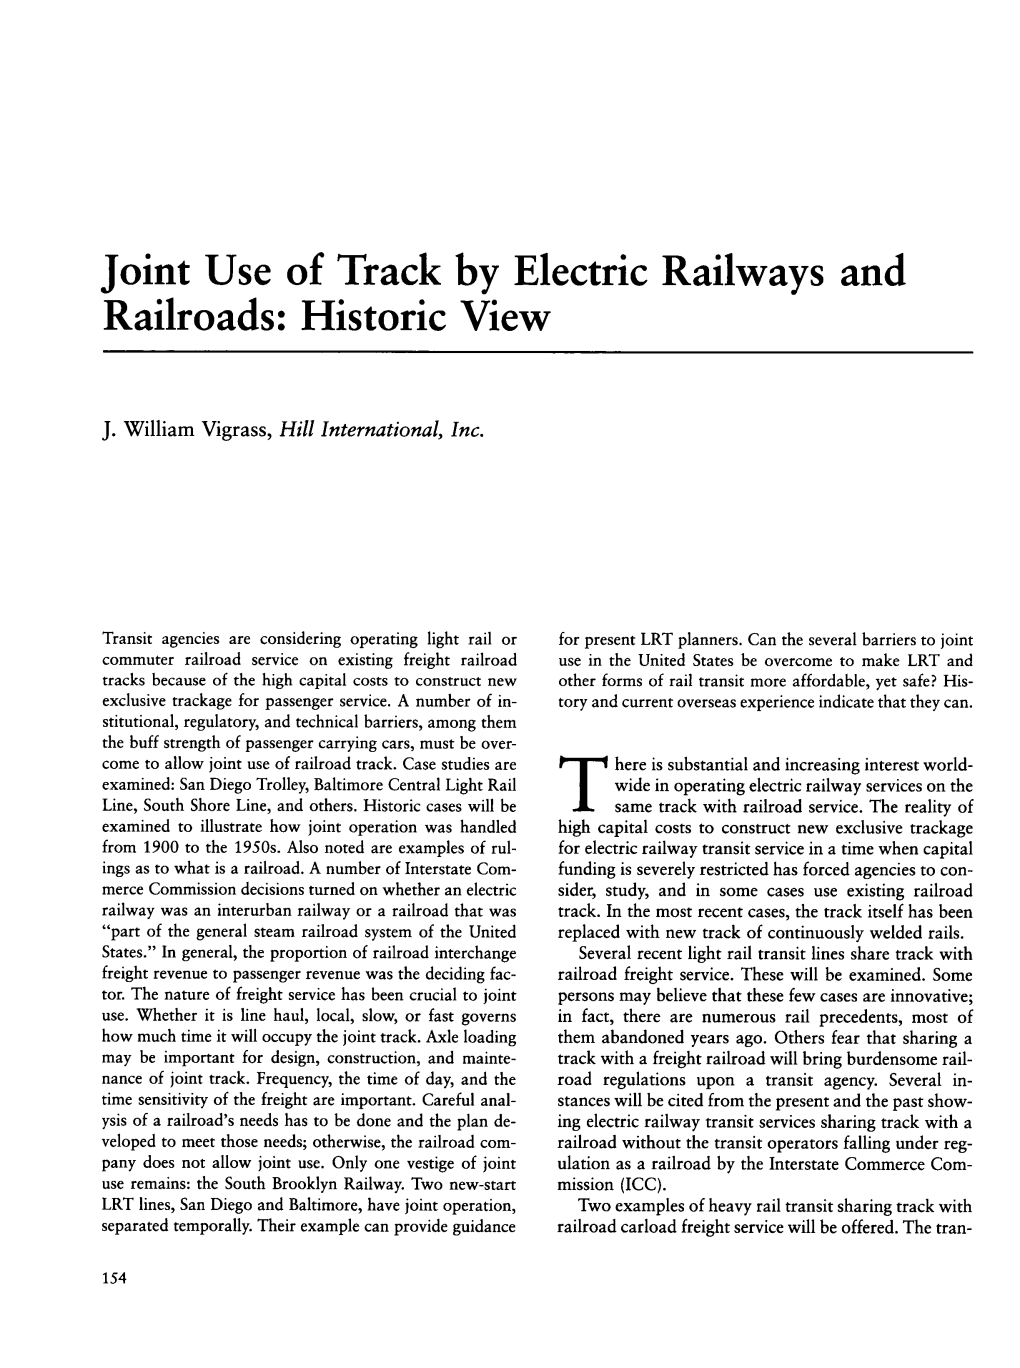 Joint Use of Track by Electric Railways and Railroads: Historic View